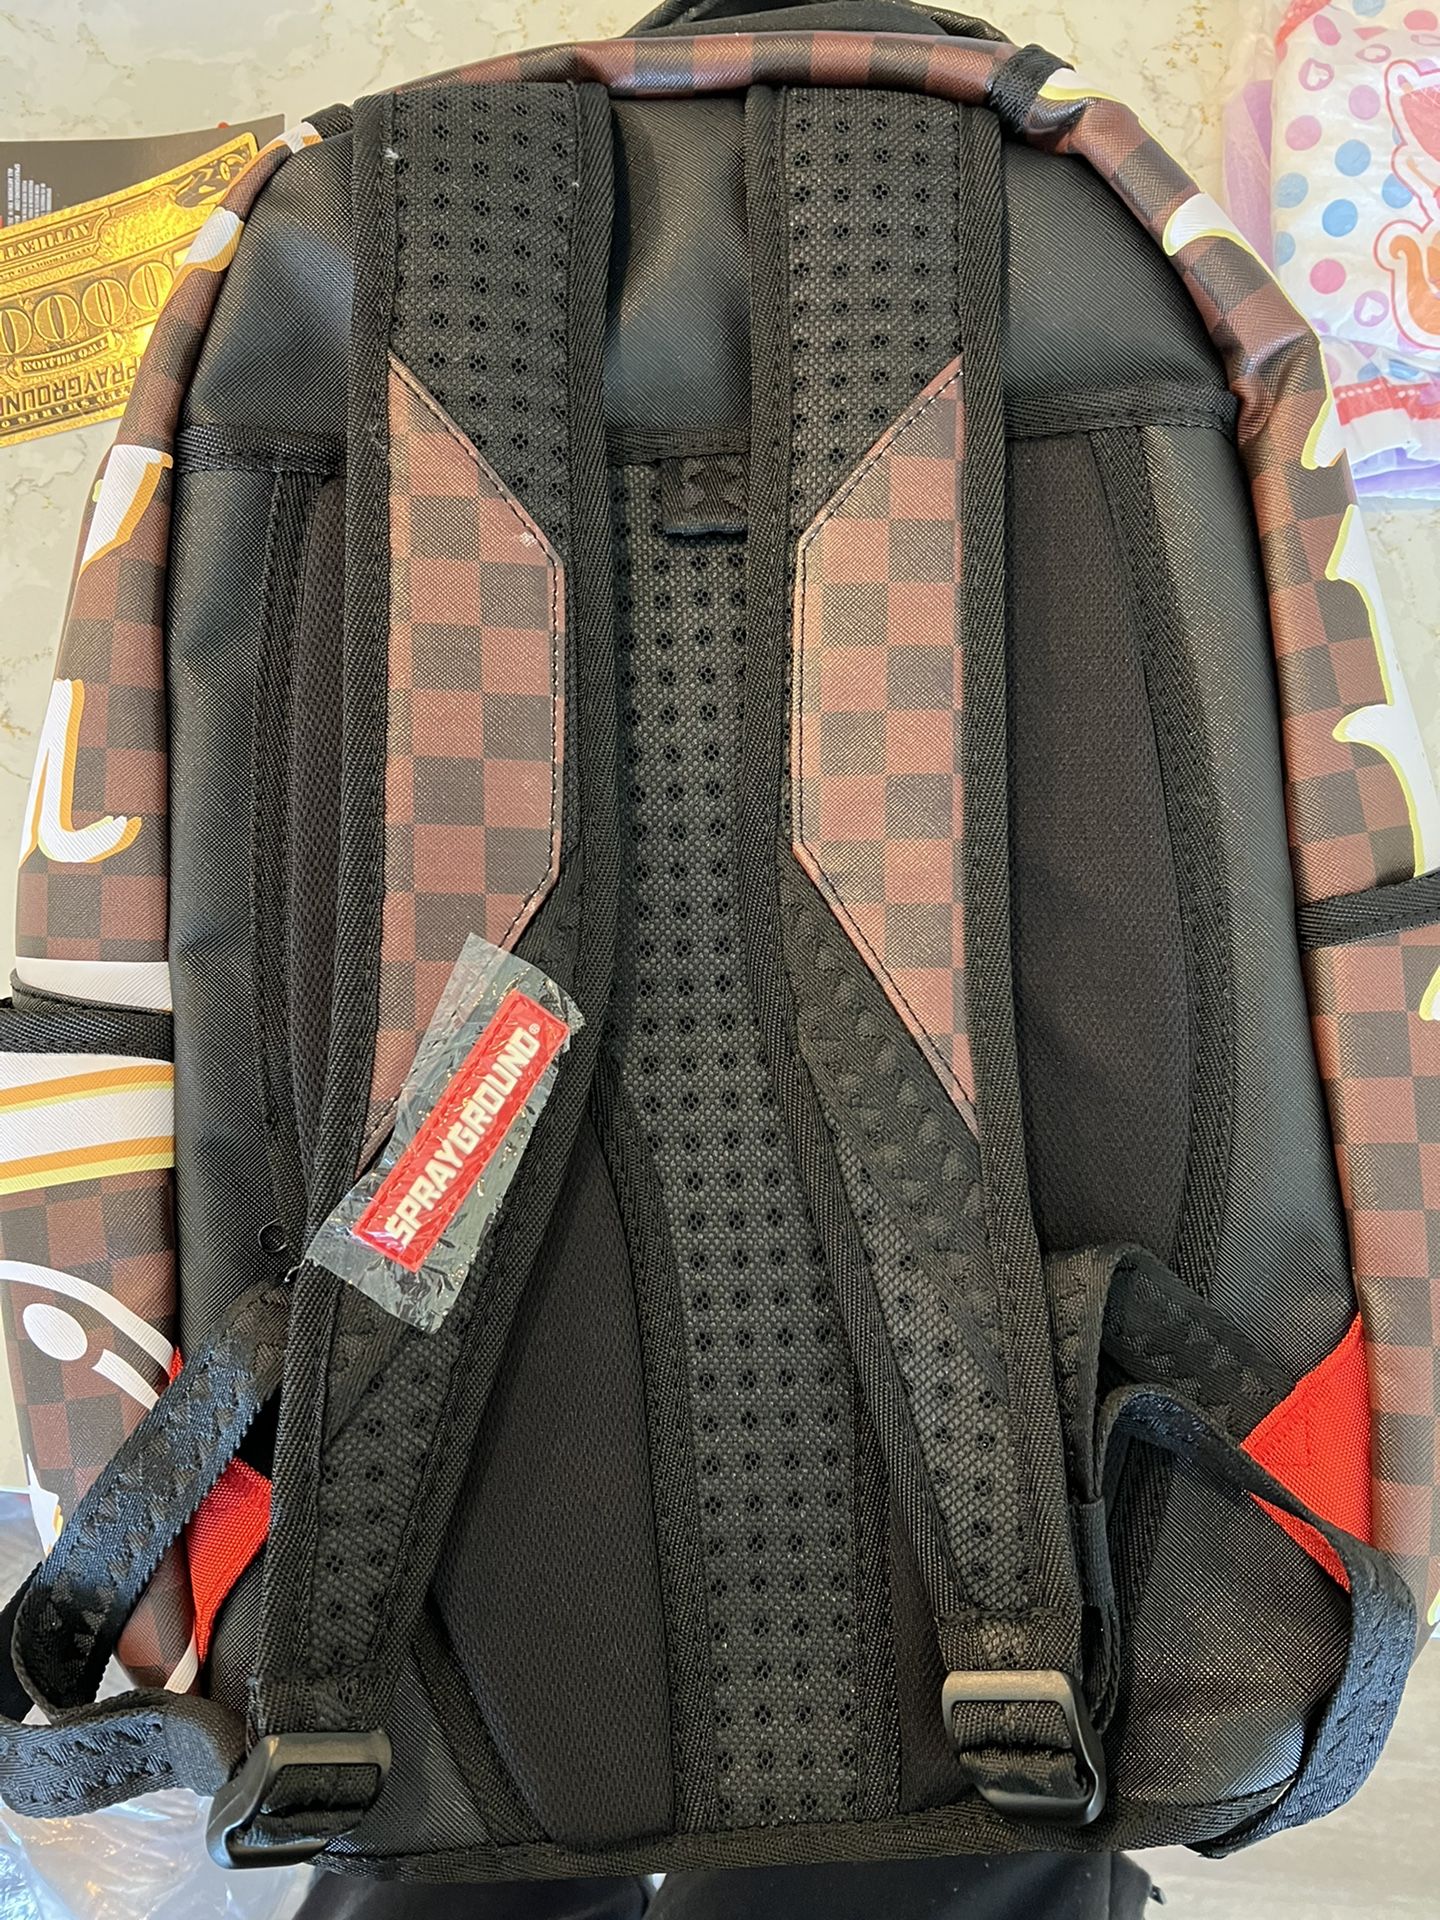 Dragon Ball Z Spray ground Backpack for Sale in Las Vegas, NV - OfferUp